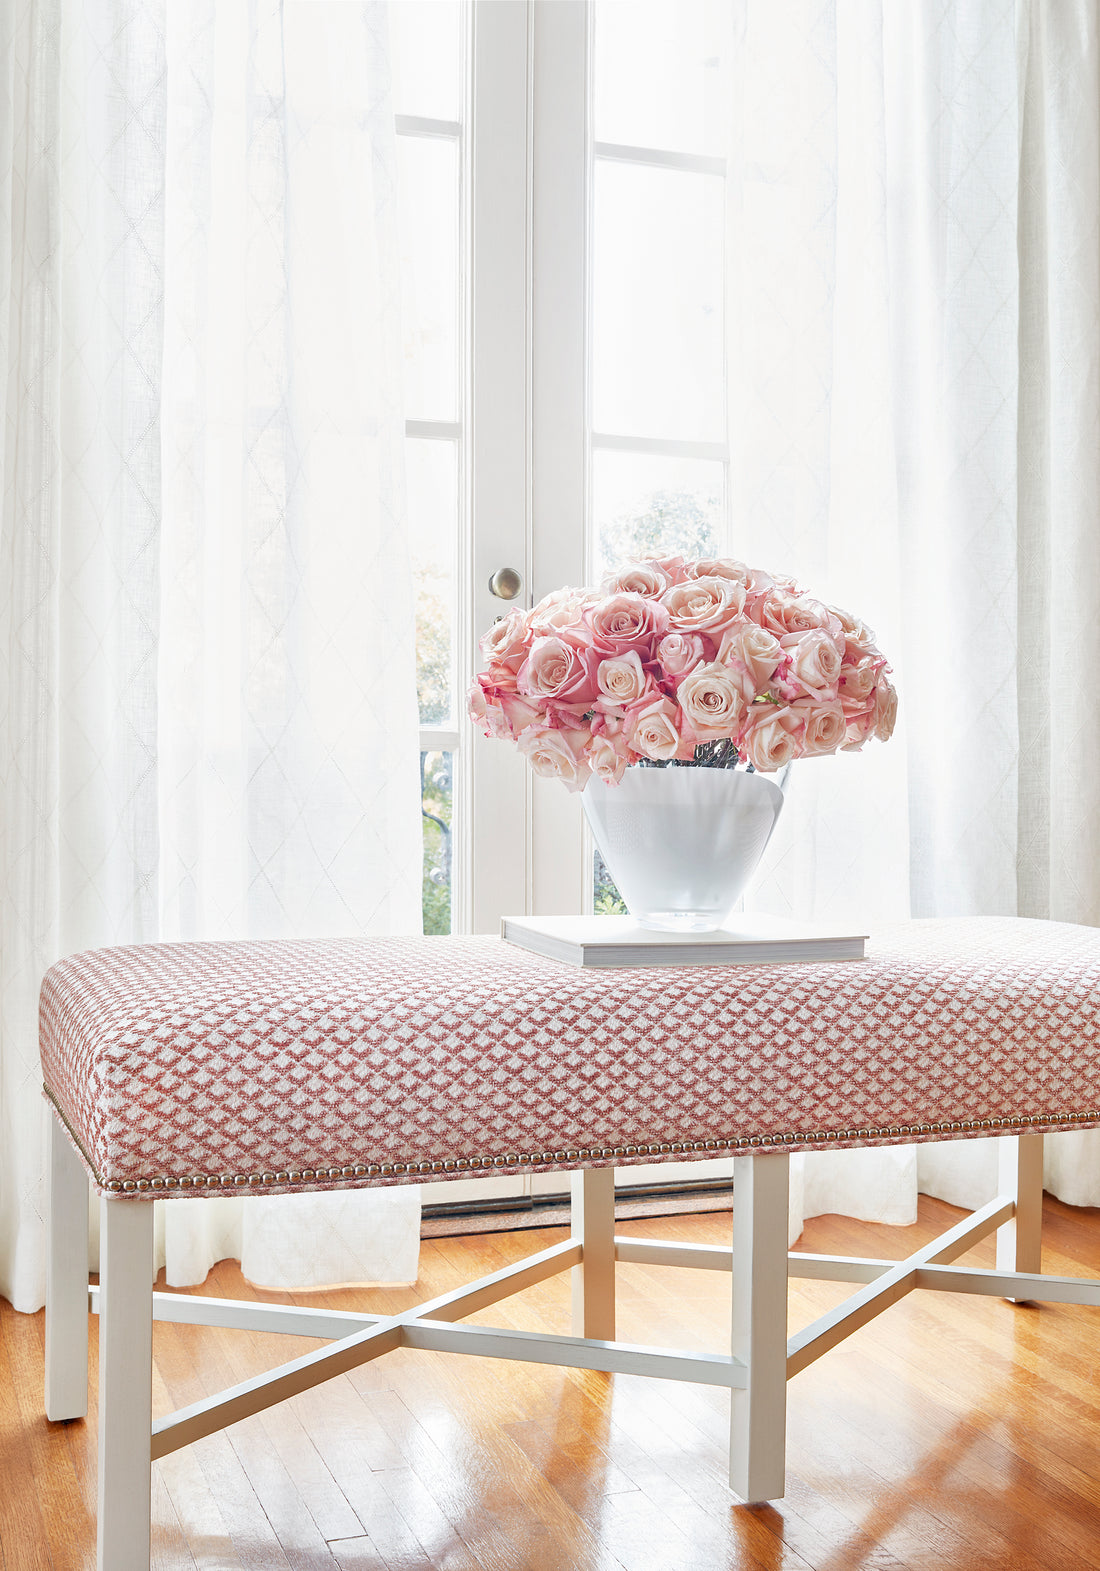 Bellwood Bench in Scala woven fabric in blush color with flower arrangement - pattern number W80727 - by Thibaut in the Woven Resource Vol 11 Rialto collection